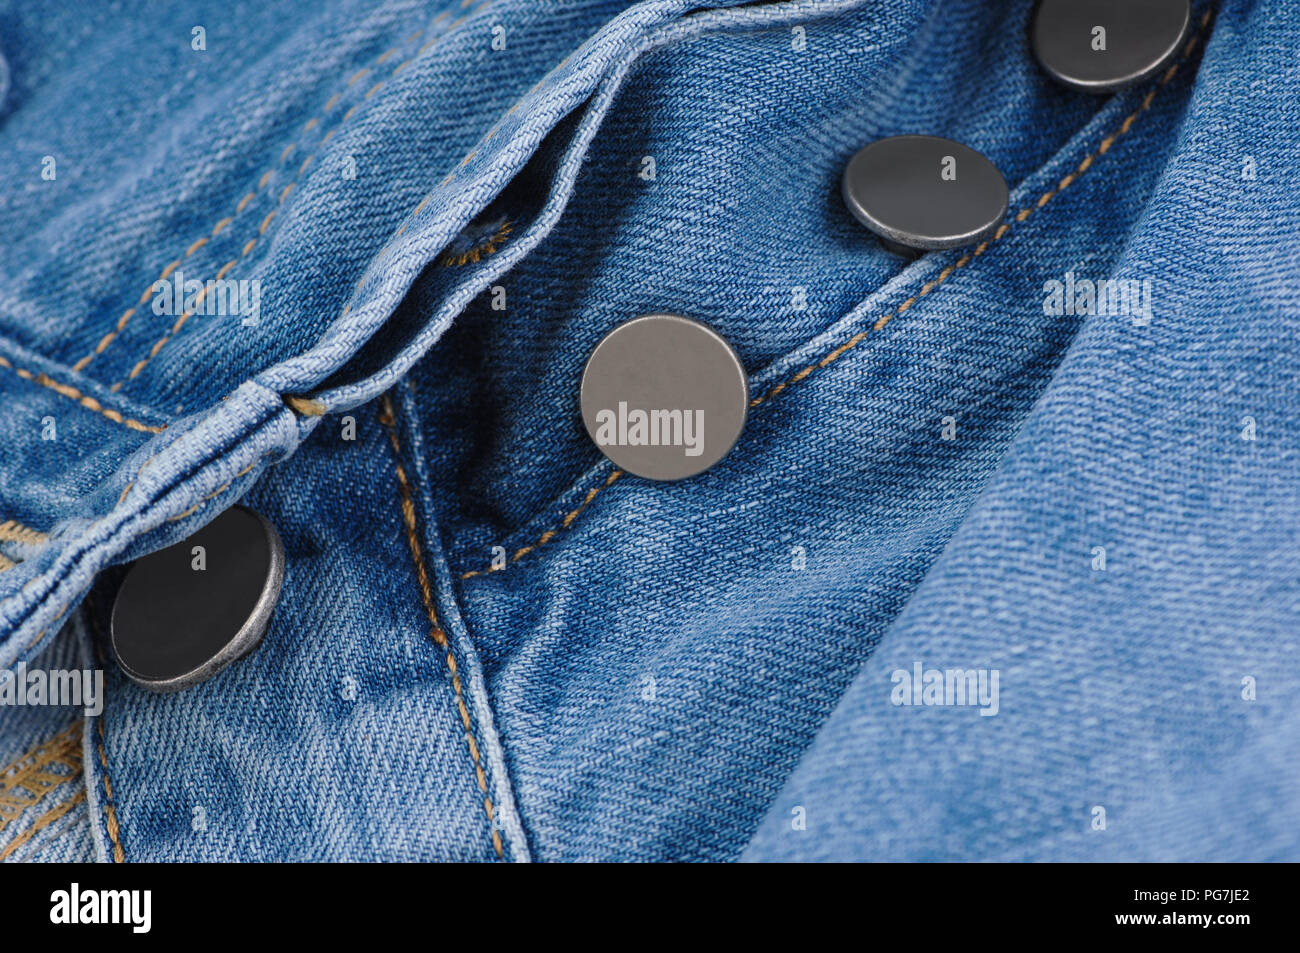 4,438 Pants Buttons Stock Photos - Free & Royalty-Free Stock Photos from  Dreamstime